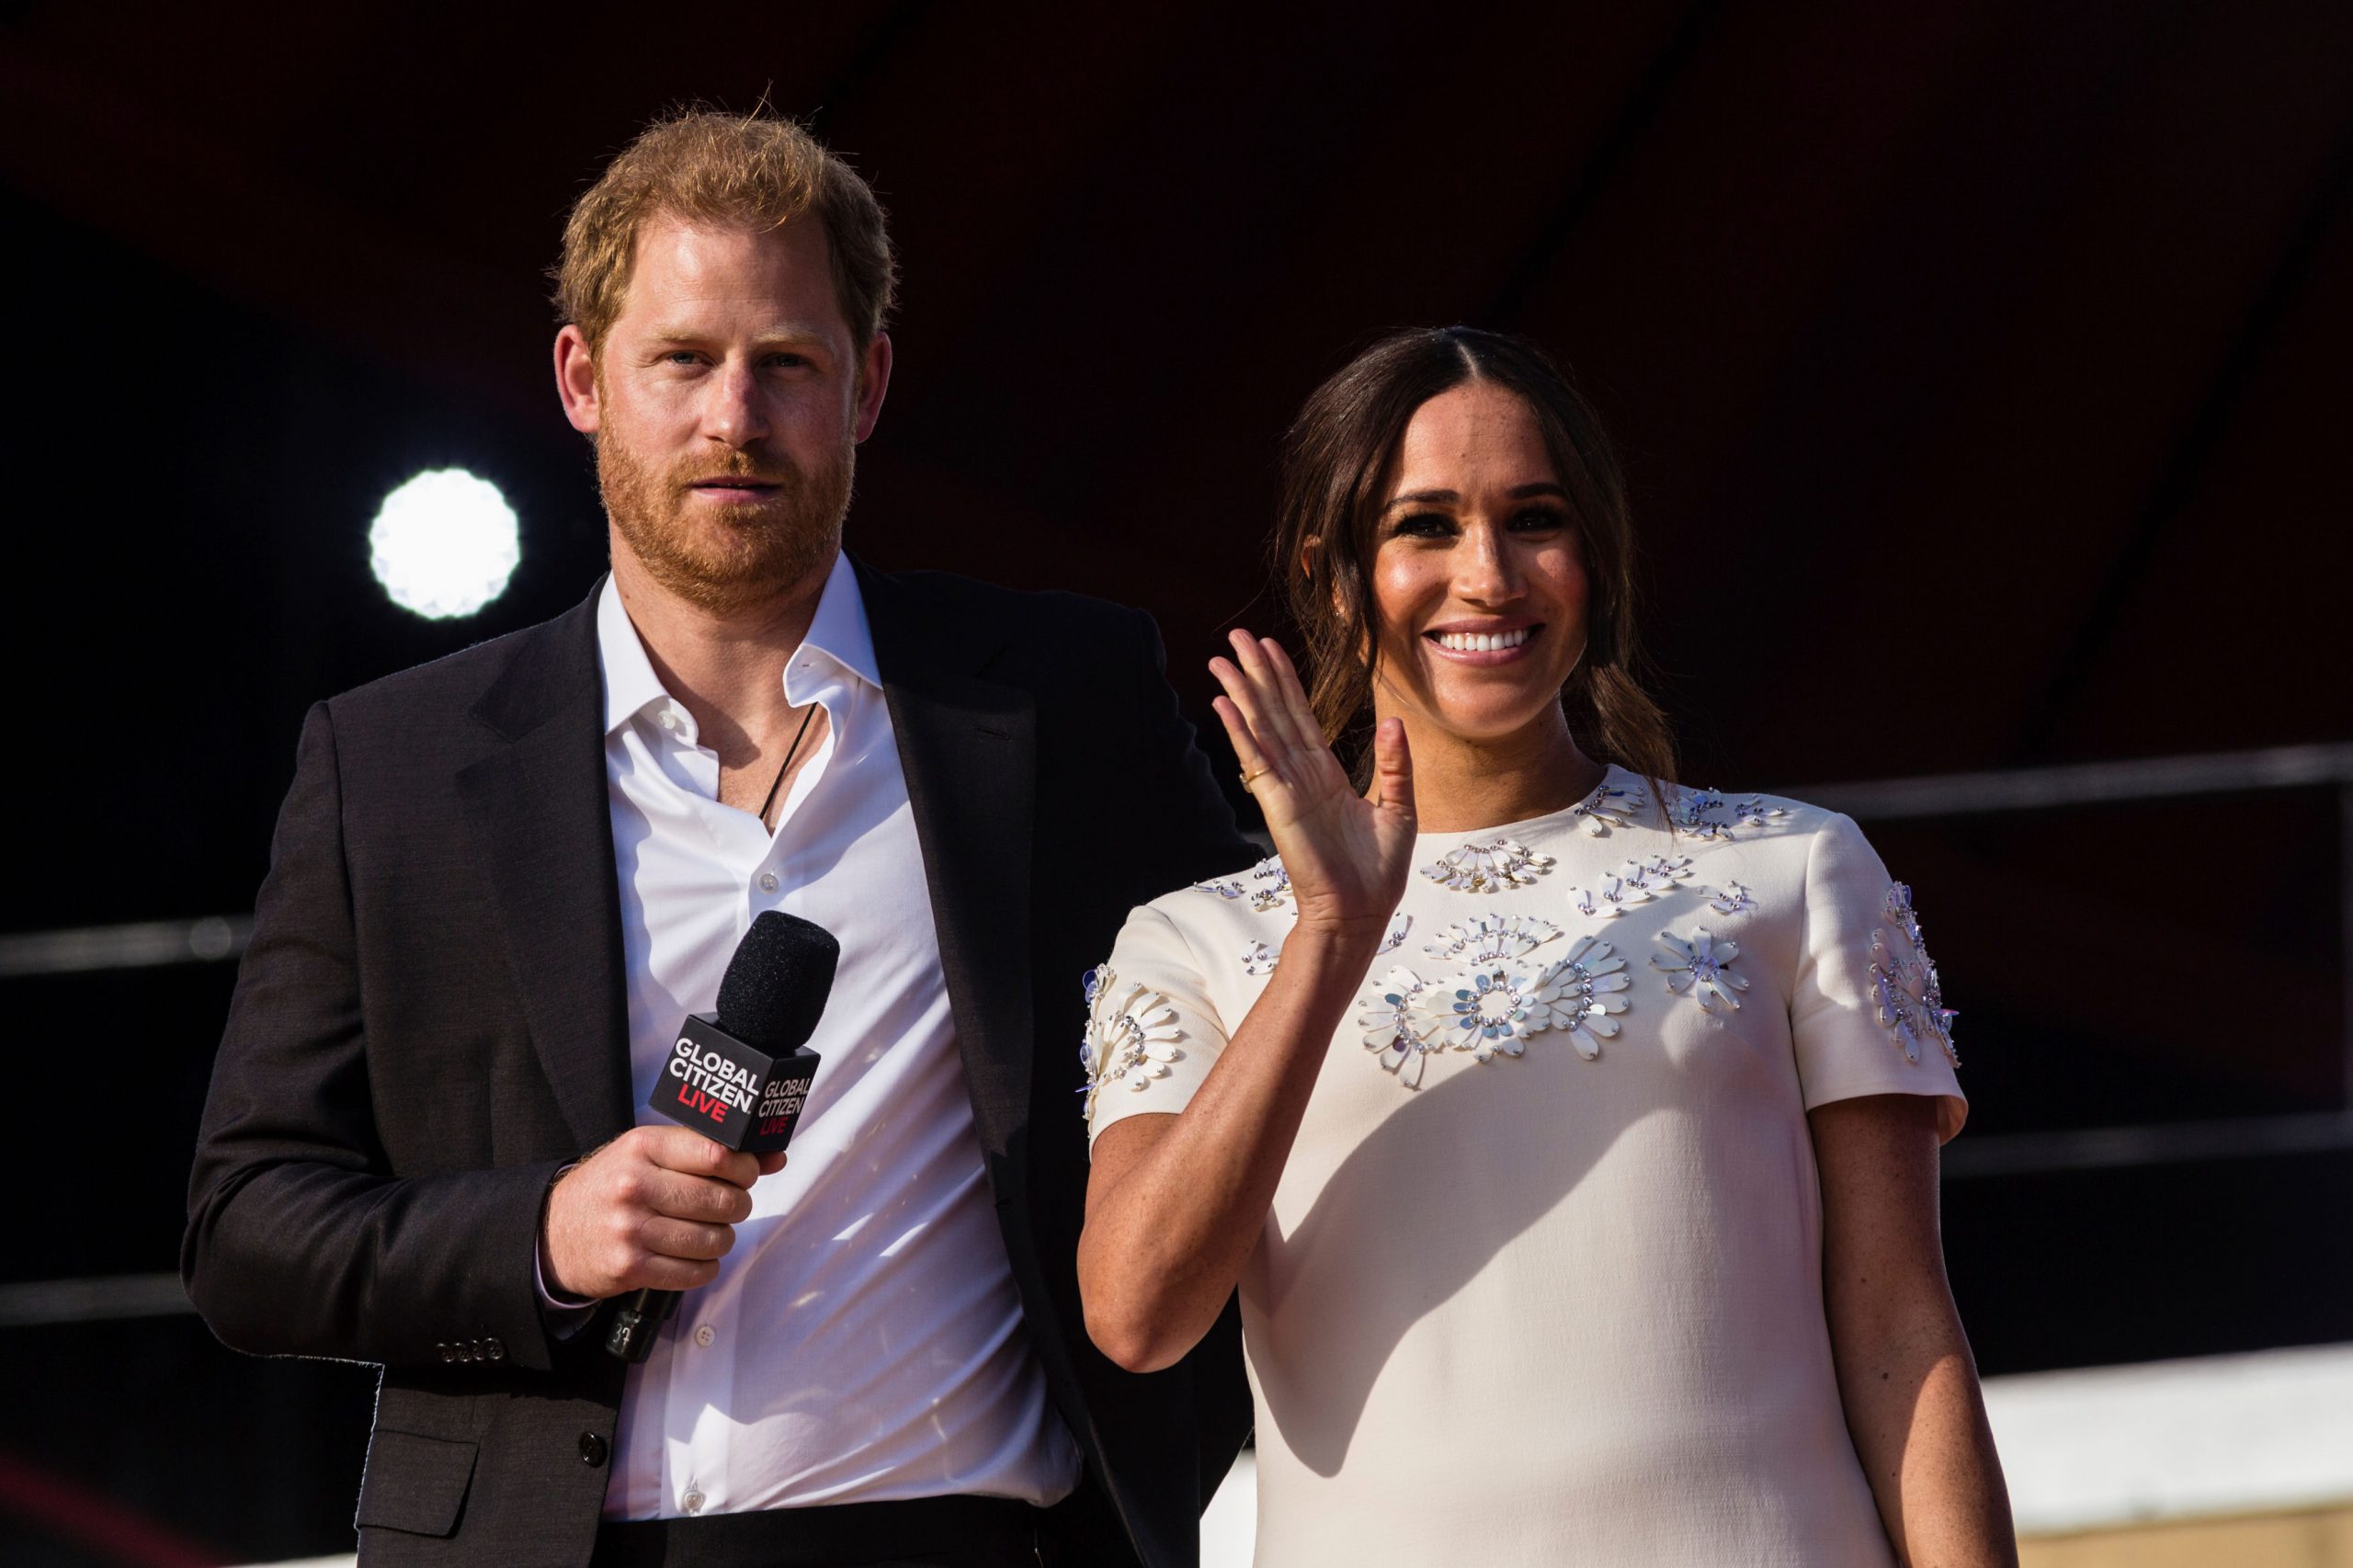 Multiple break-ins at Prince Harry and Meghan Markle’s California home: Report